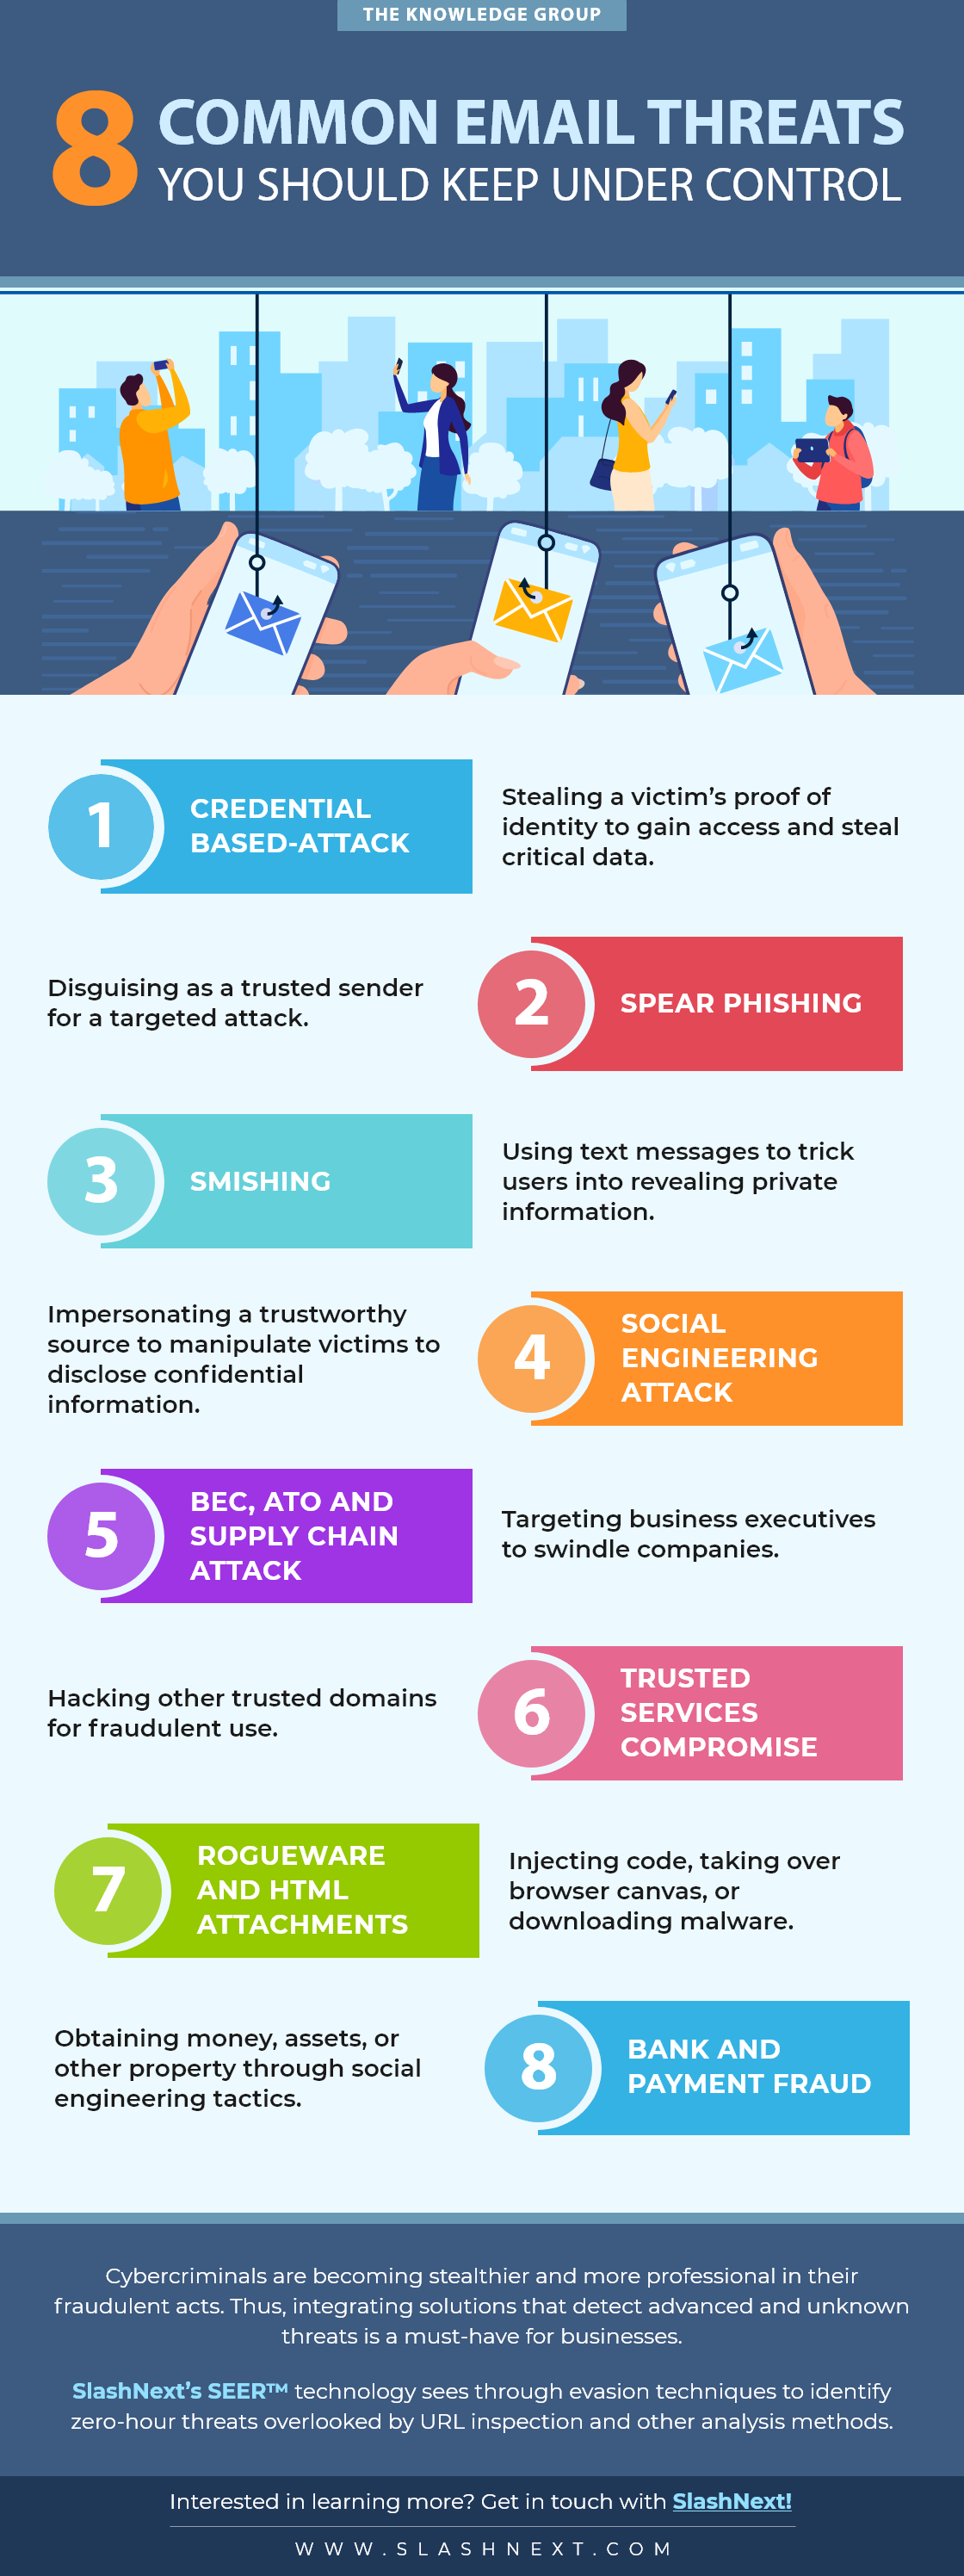 Email Threats,tech,knowledge,webcast